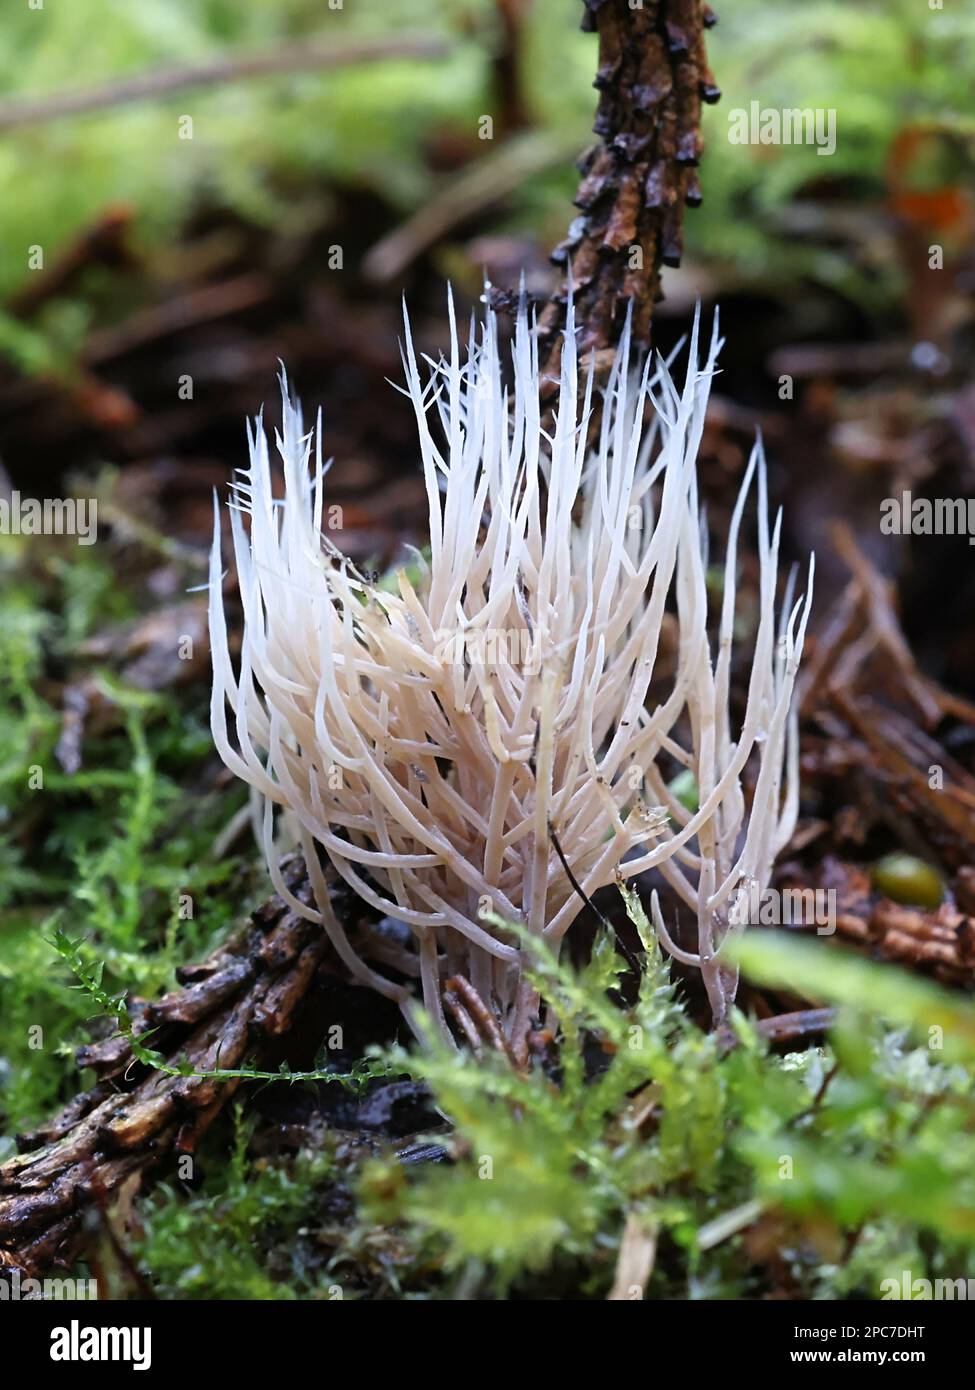 Pterula multifida, a coral fungus growing on spruce litter in Finland, no common English name Stock Photo